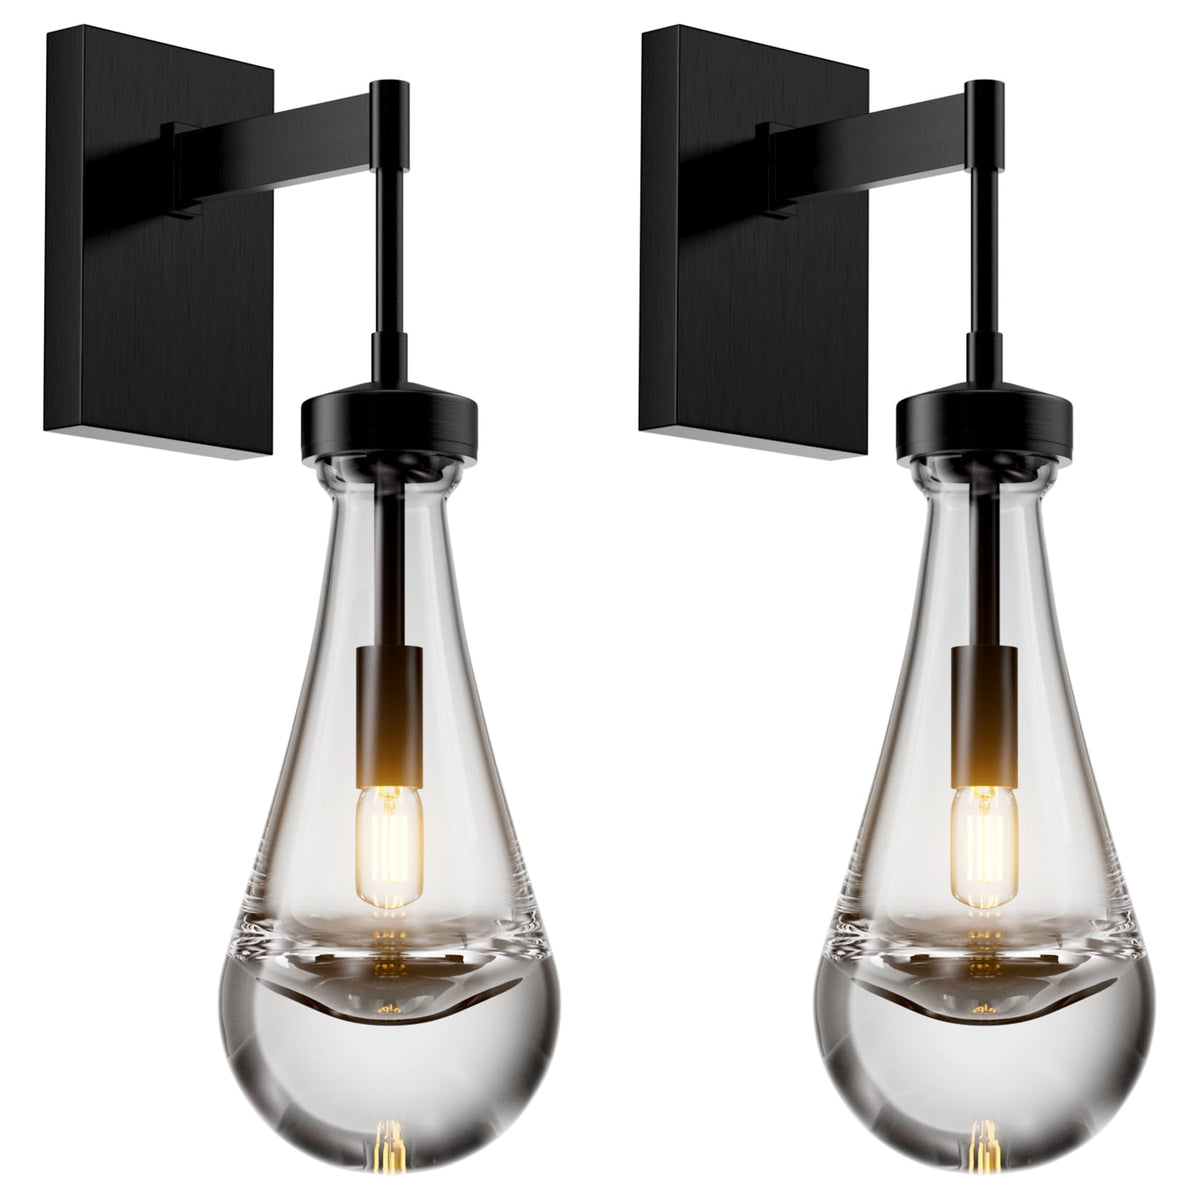 Modern Raindrop Wall Sconces Lighting Rod Type Set of 2, Matte Black Indoor Vanity Light Fixtures for Bathroom,Wall Lamp with Clear Solid Glass Raindrop for Bedroom(Including Bulb)